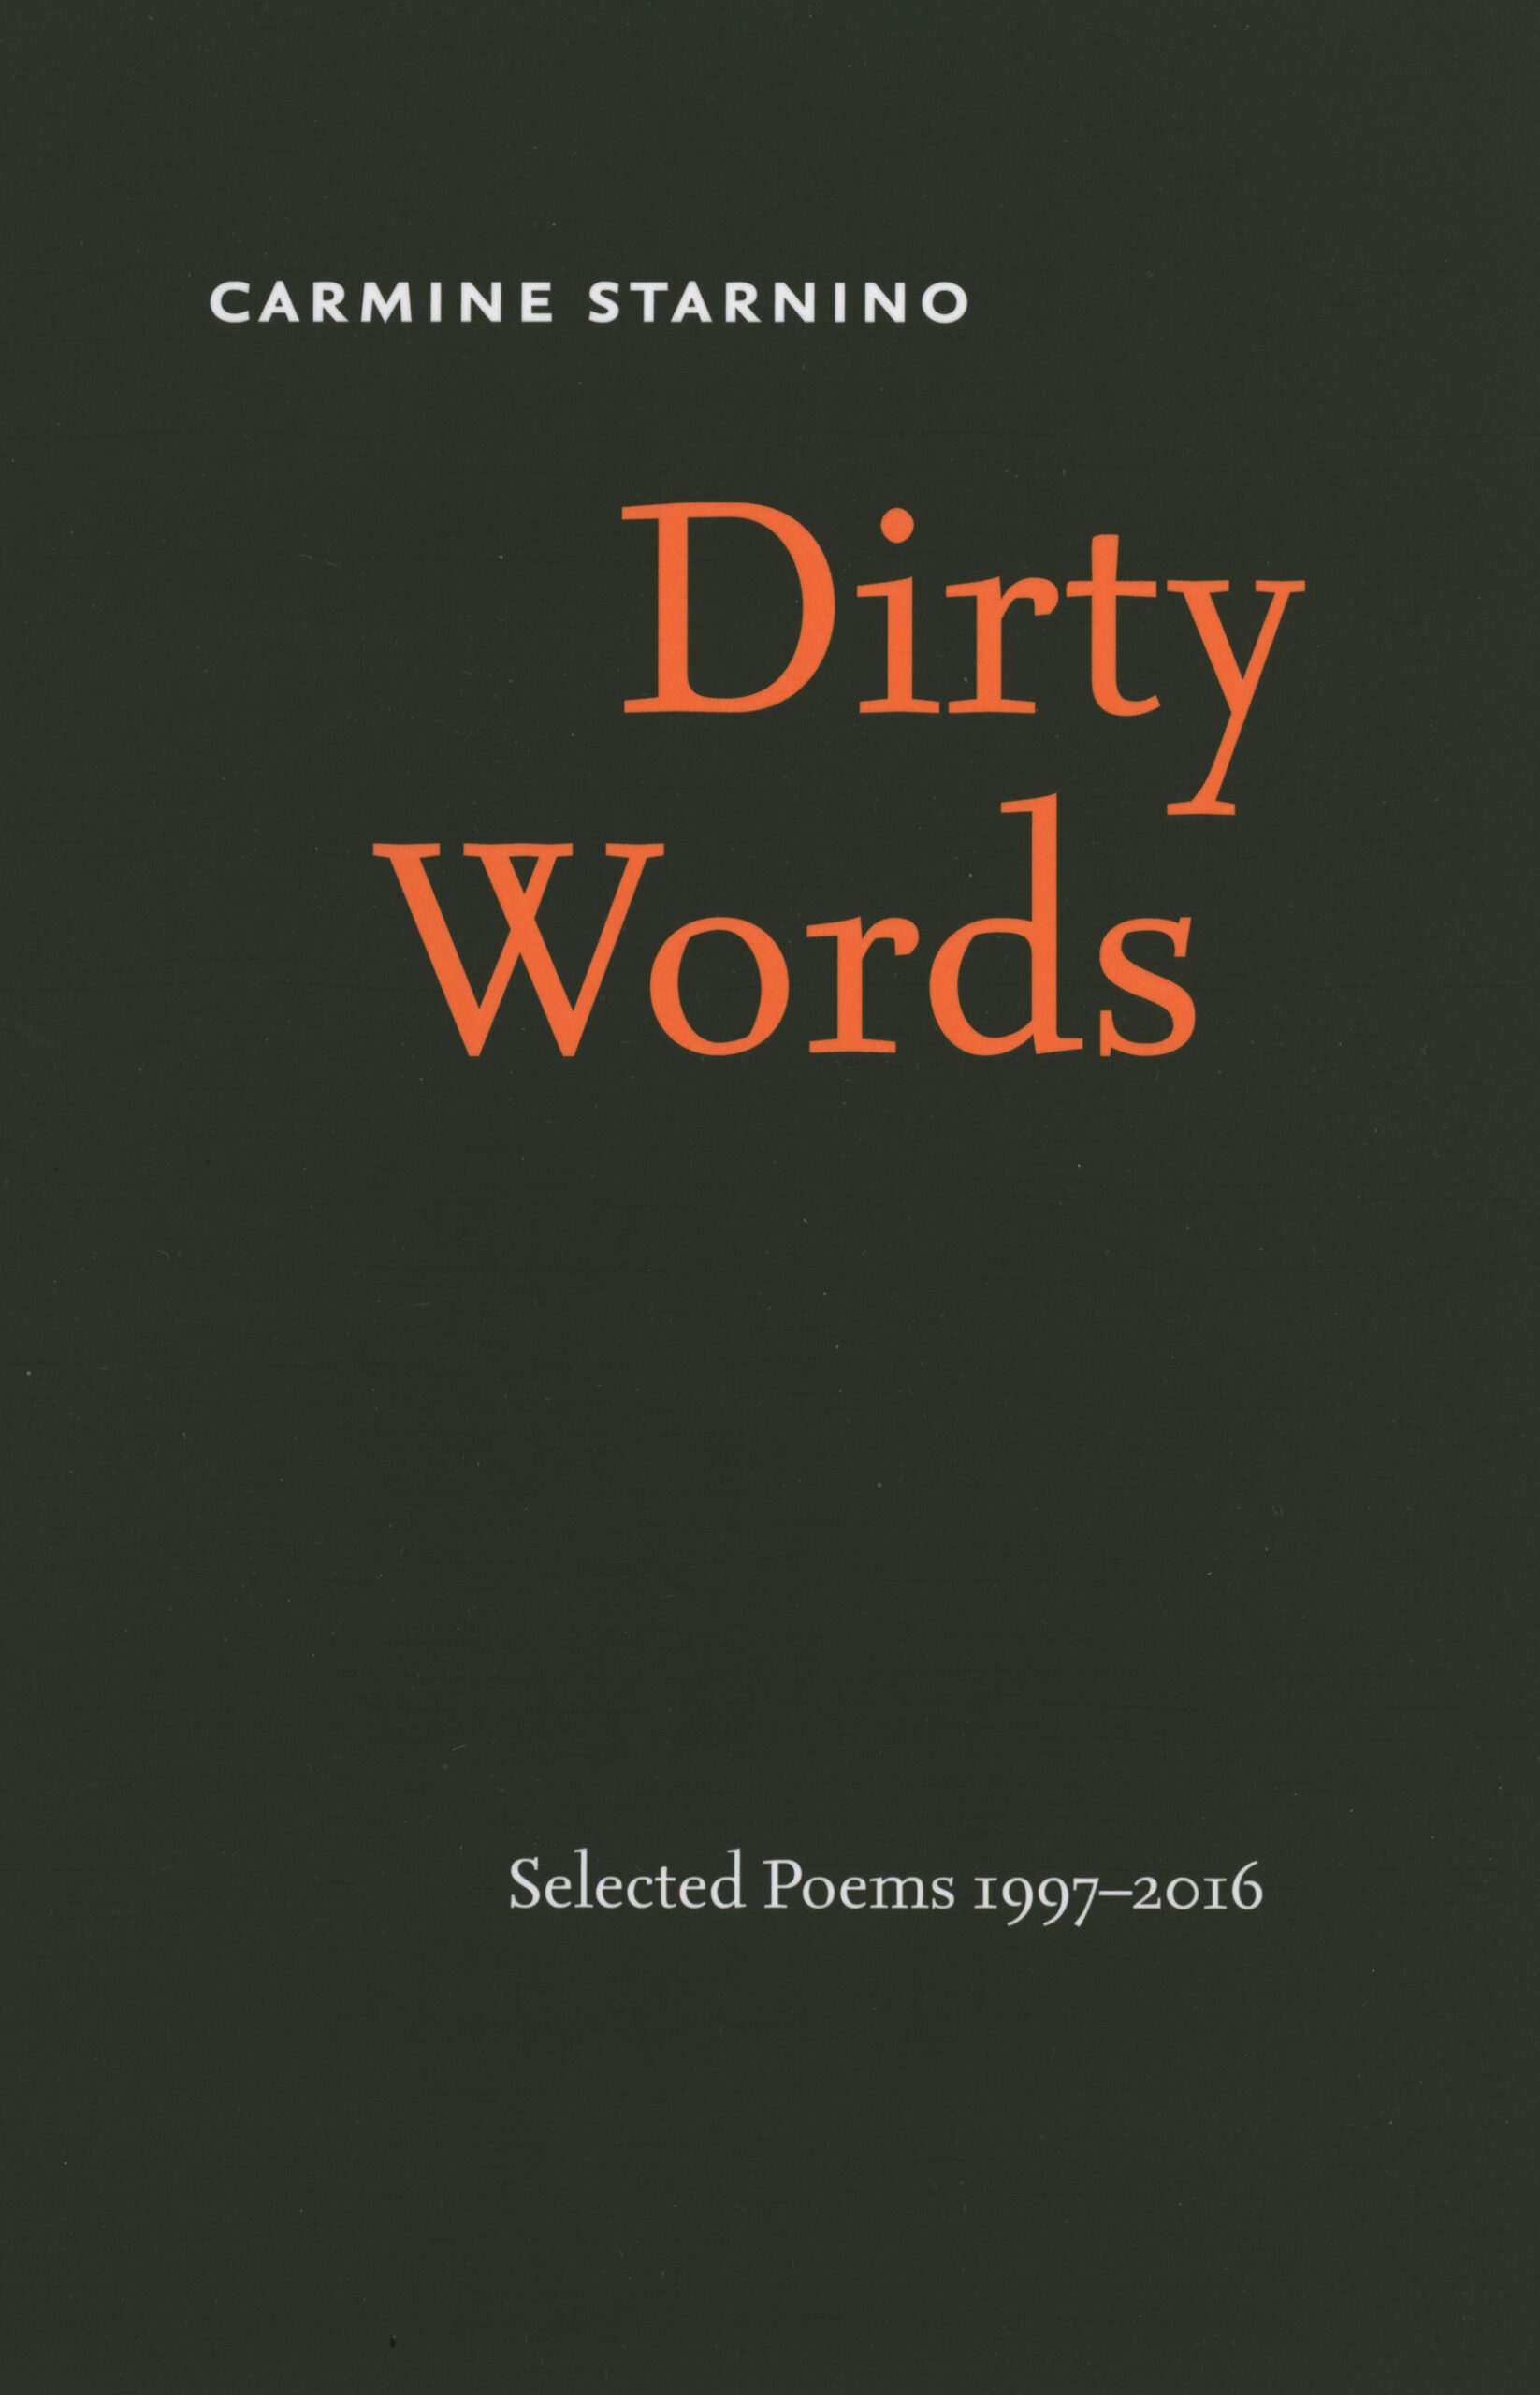 Dirty Words: Selected Poems 1997-2016